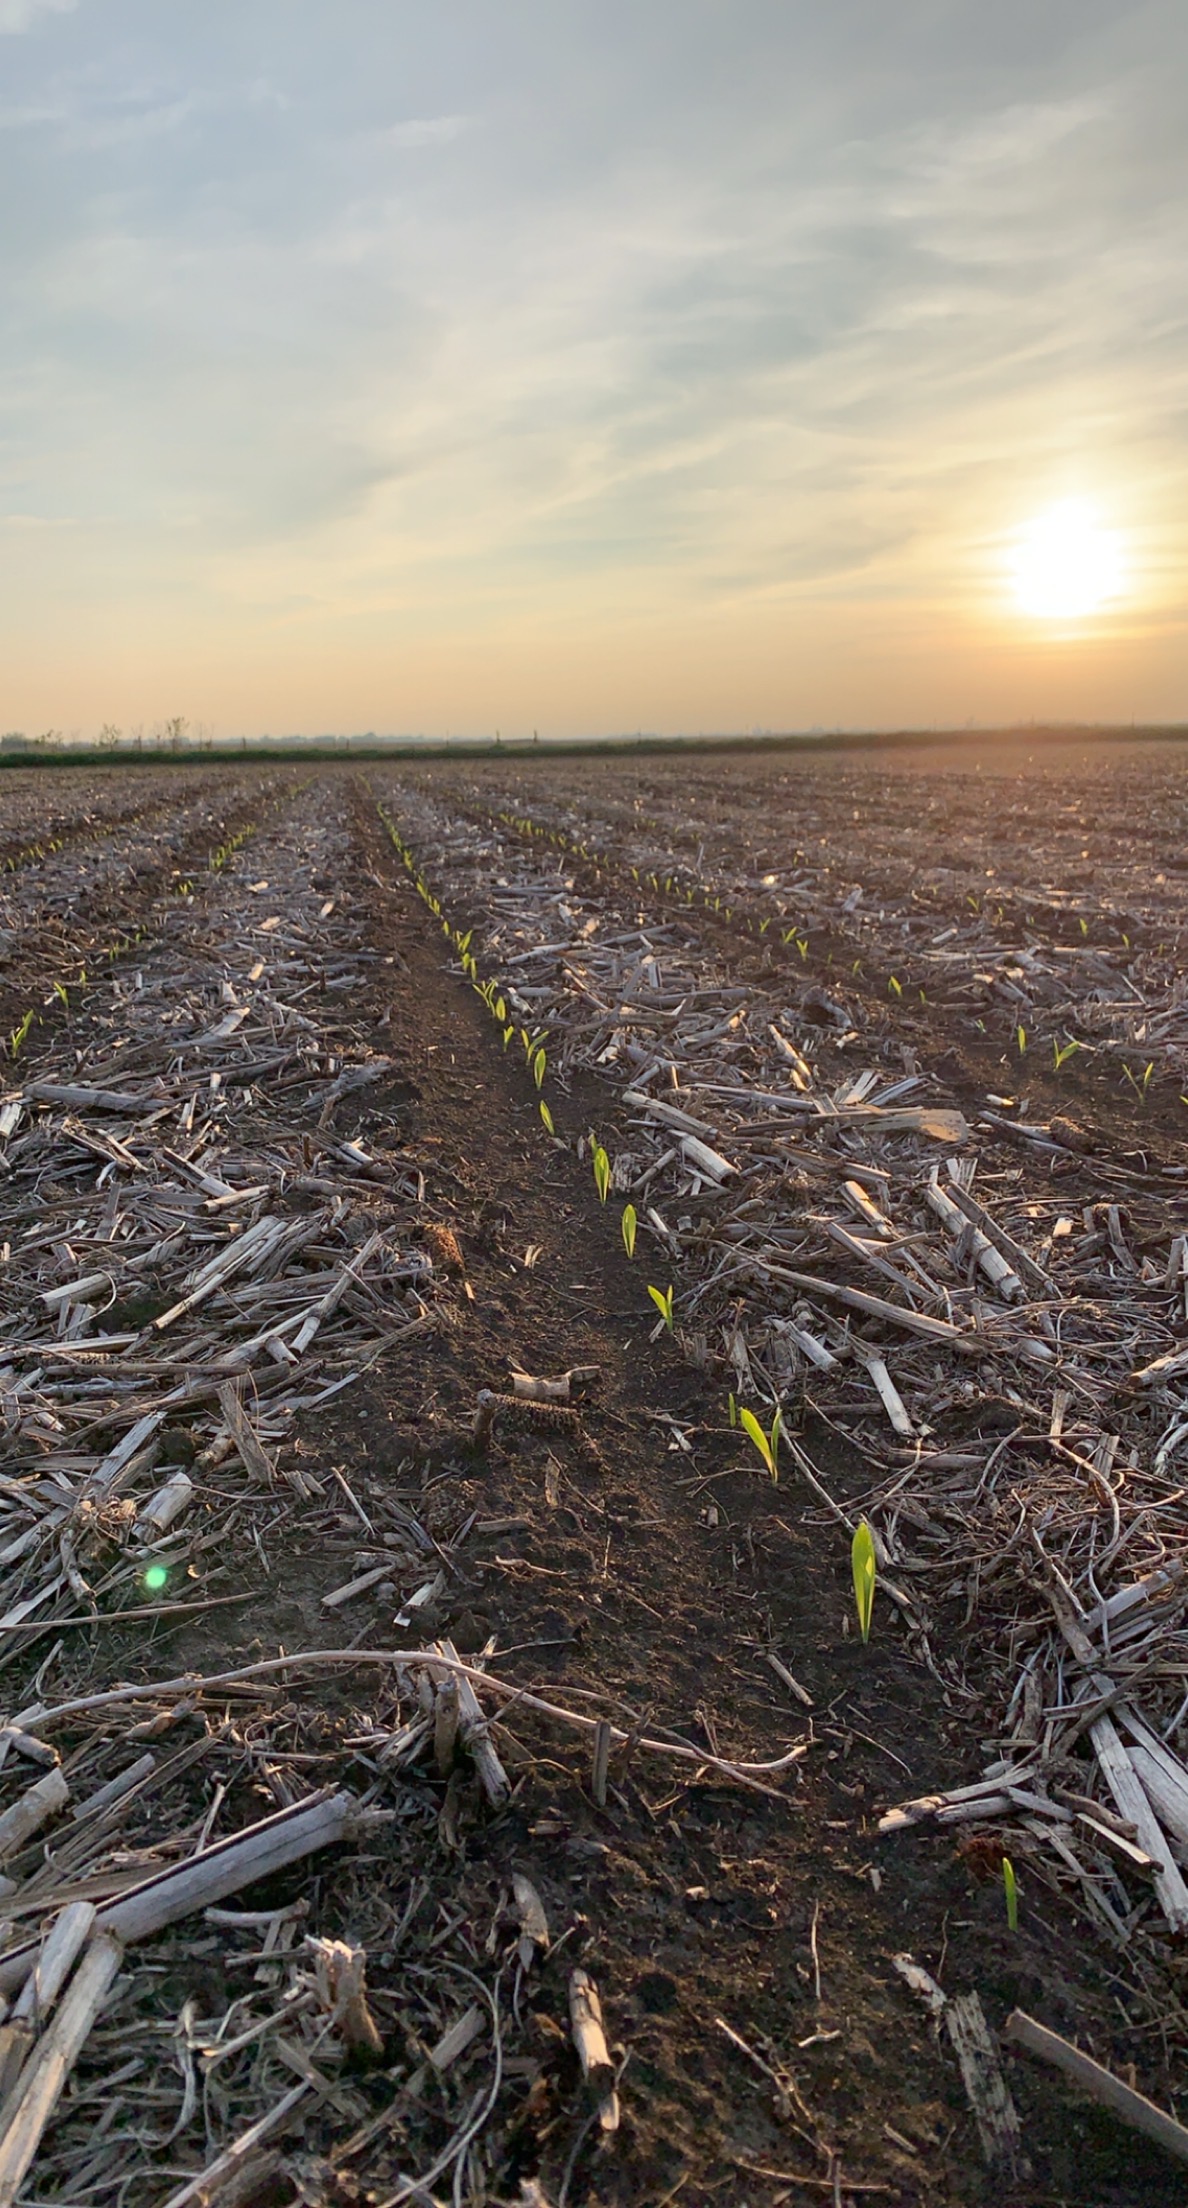 Photo of a sunset over a field of heavy crop residue with a healthy crop of young corn plants growing through the residue.